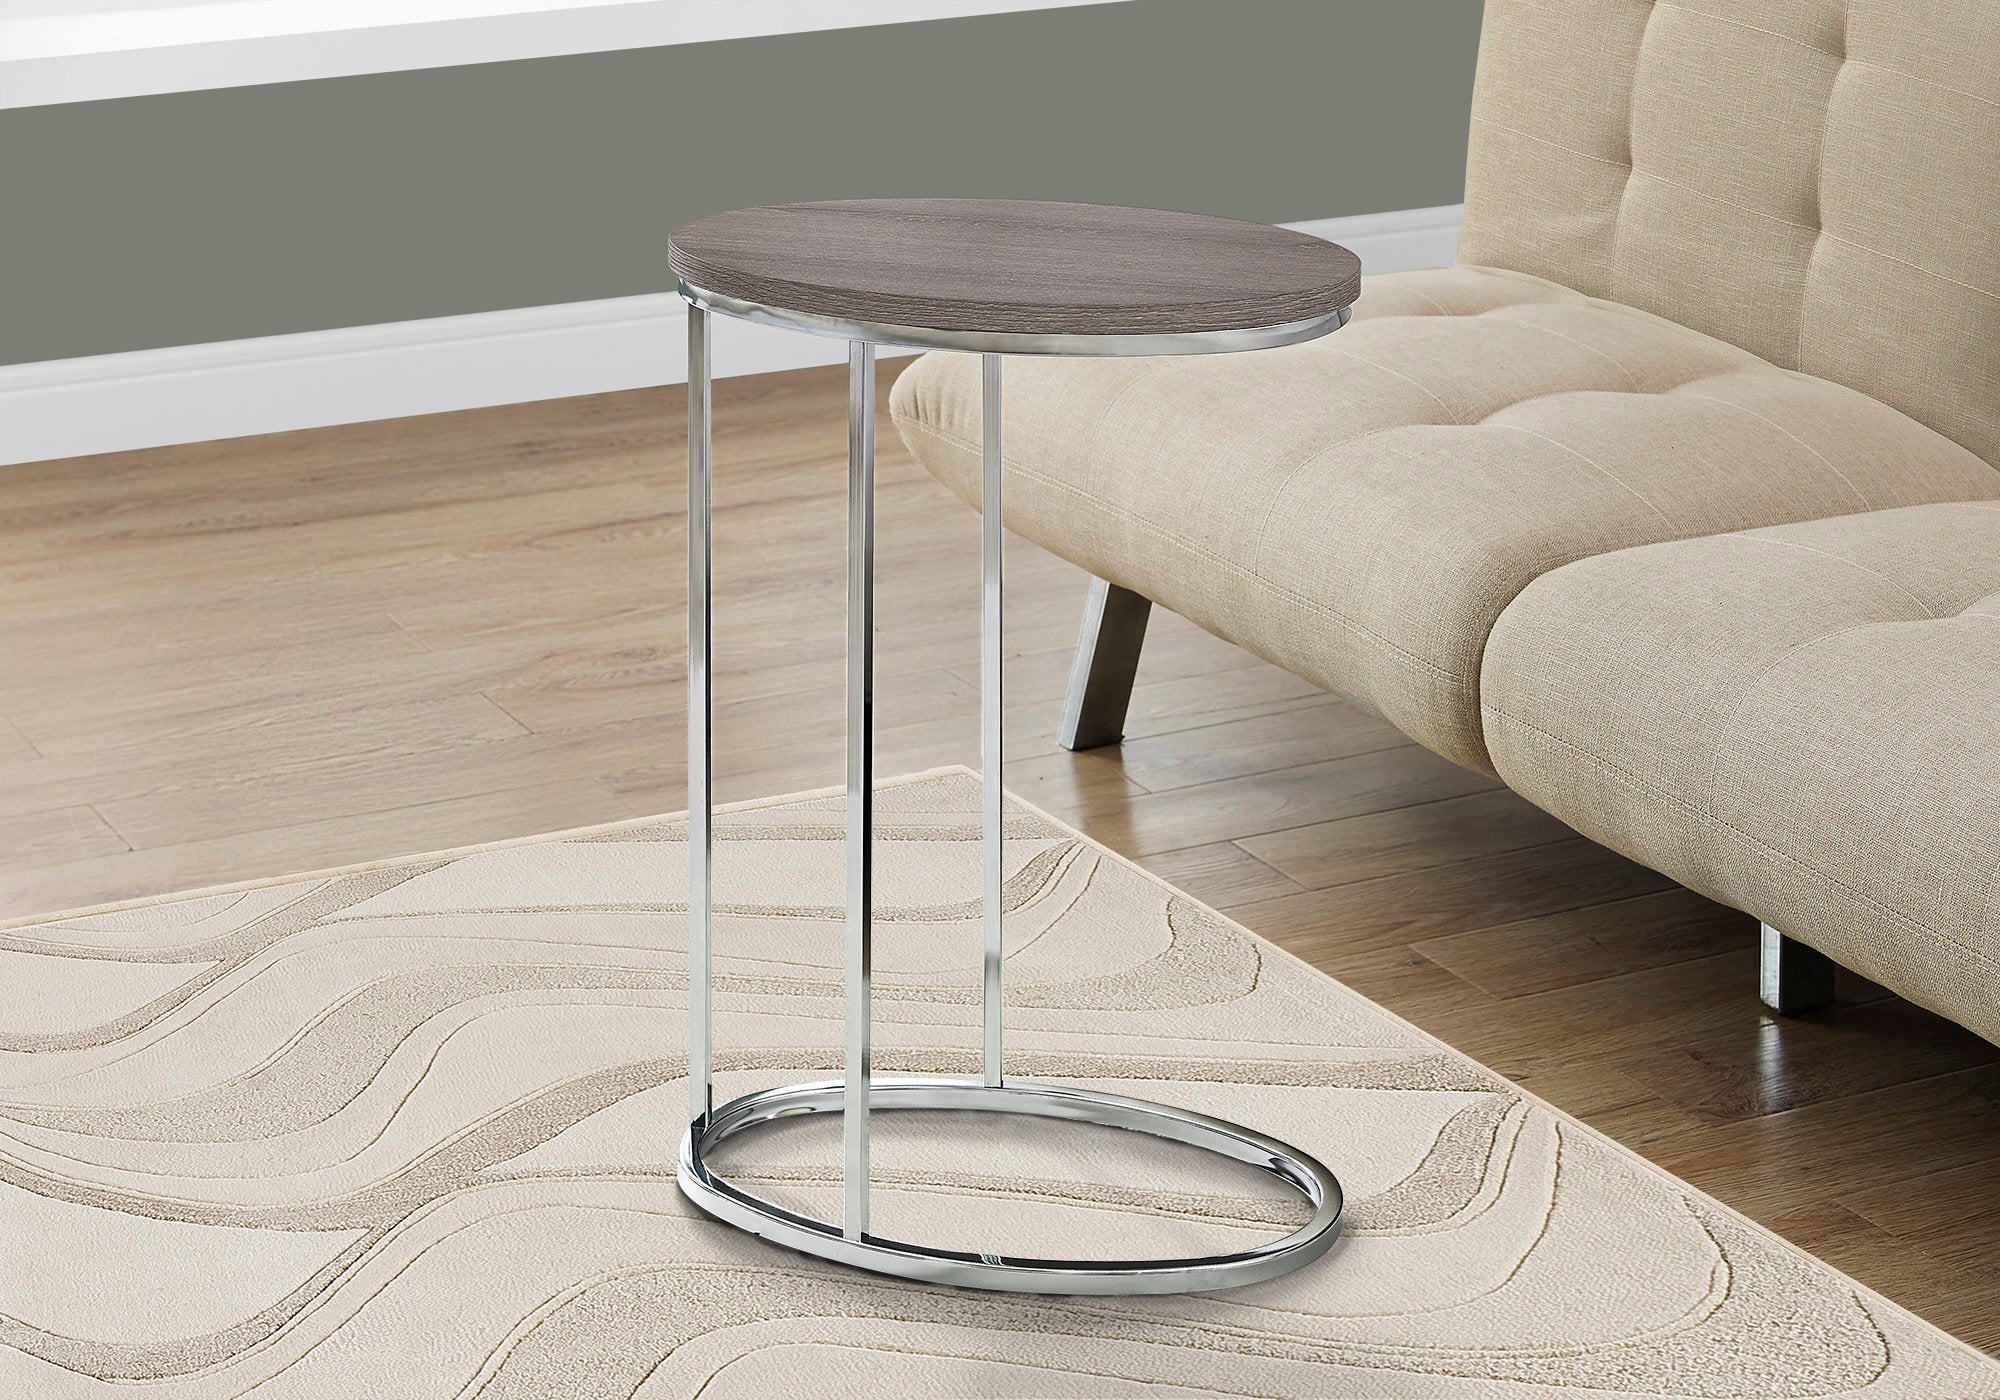 Oval Dark Taupe with Chrome Metal Accent Table